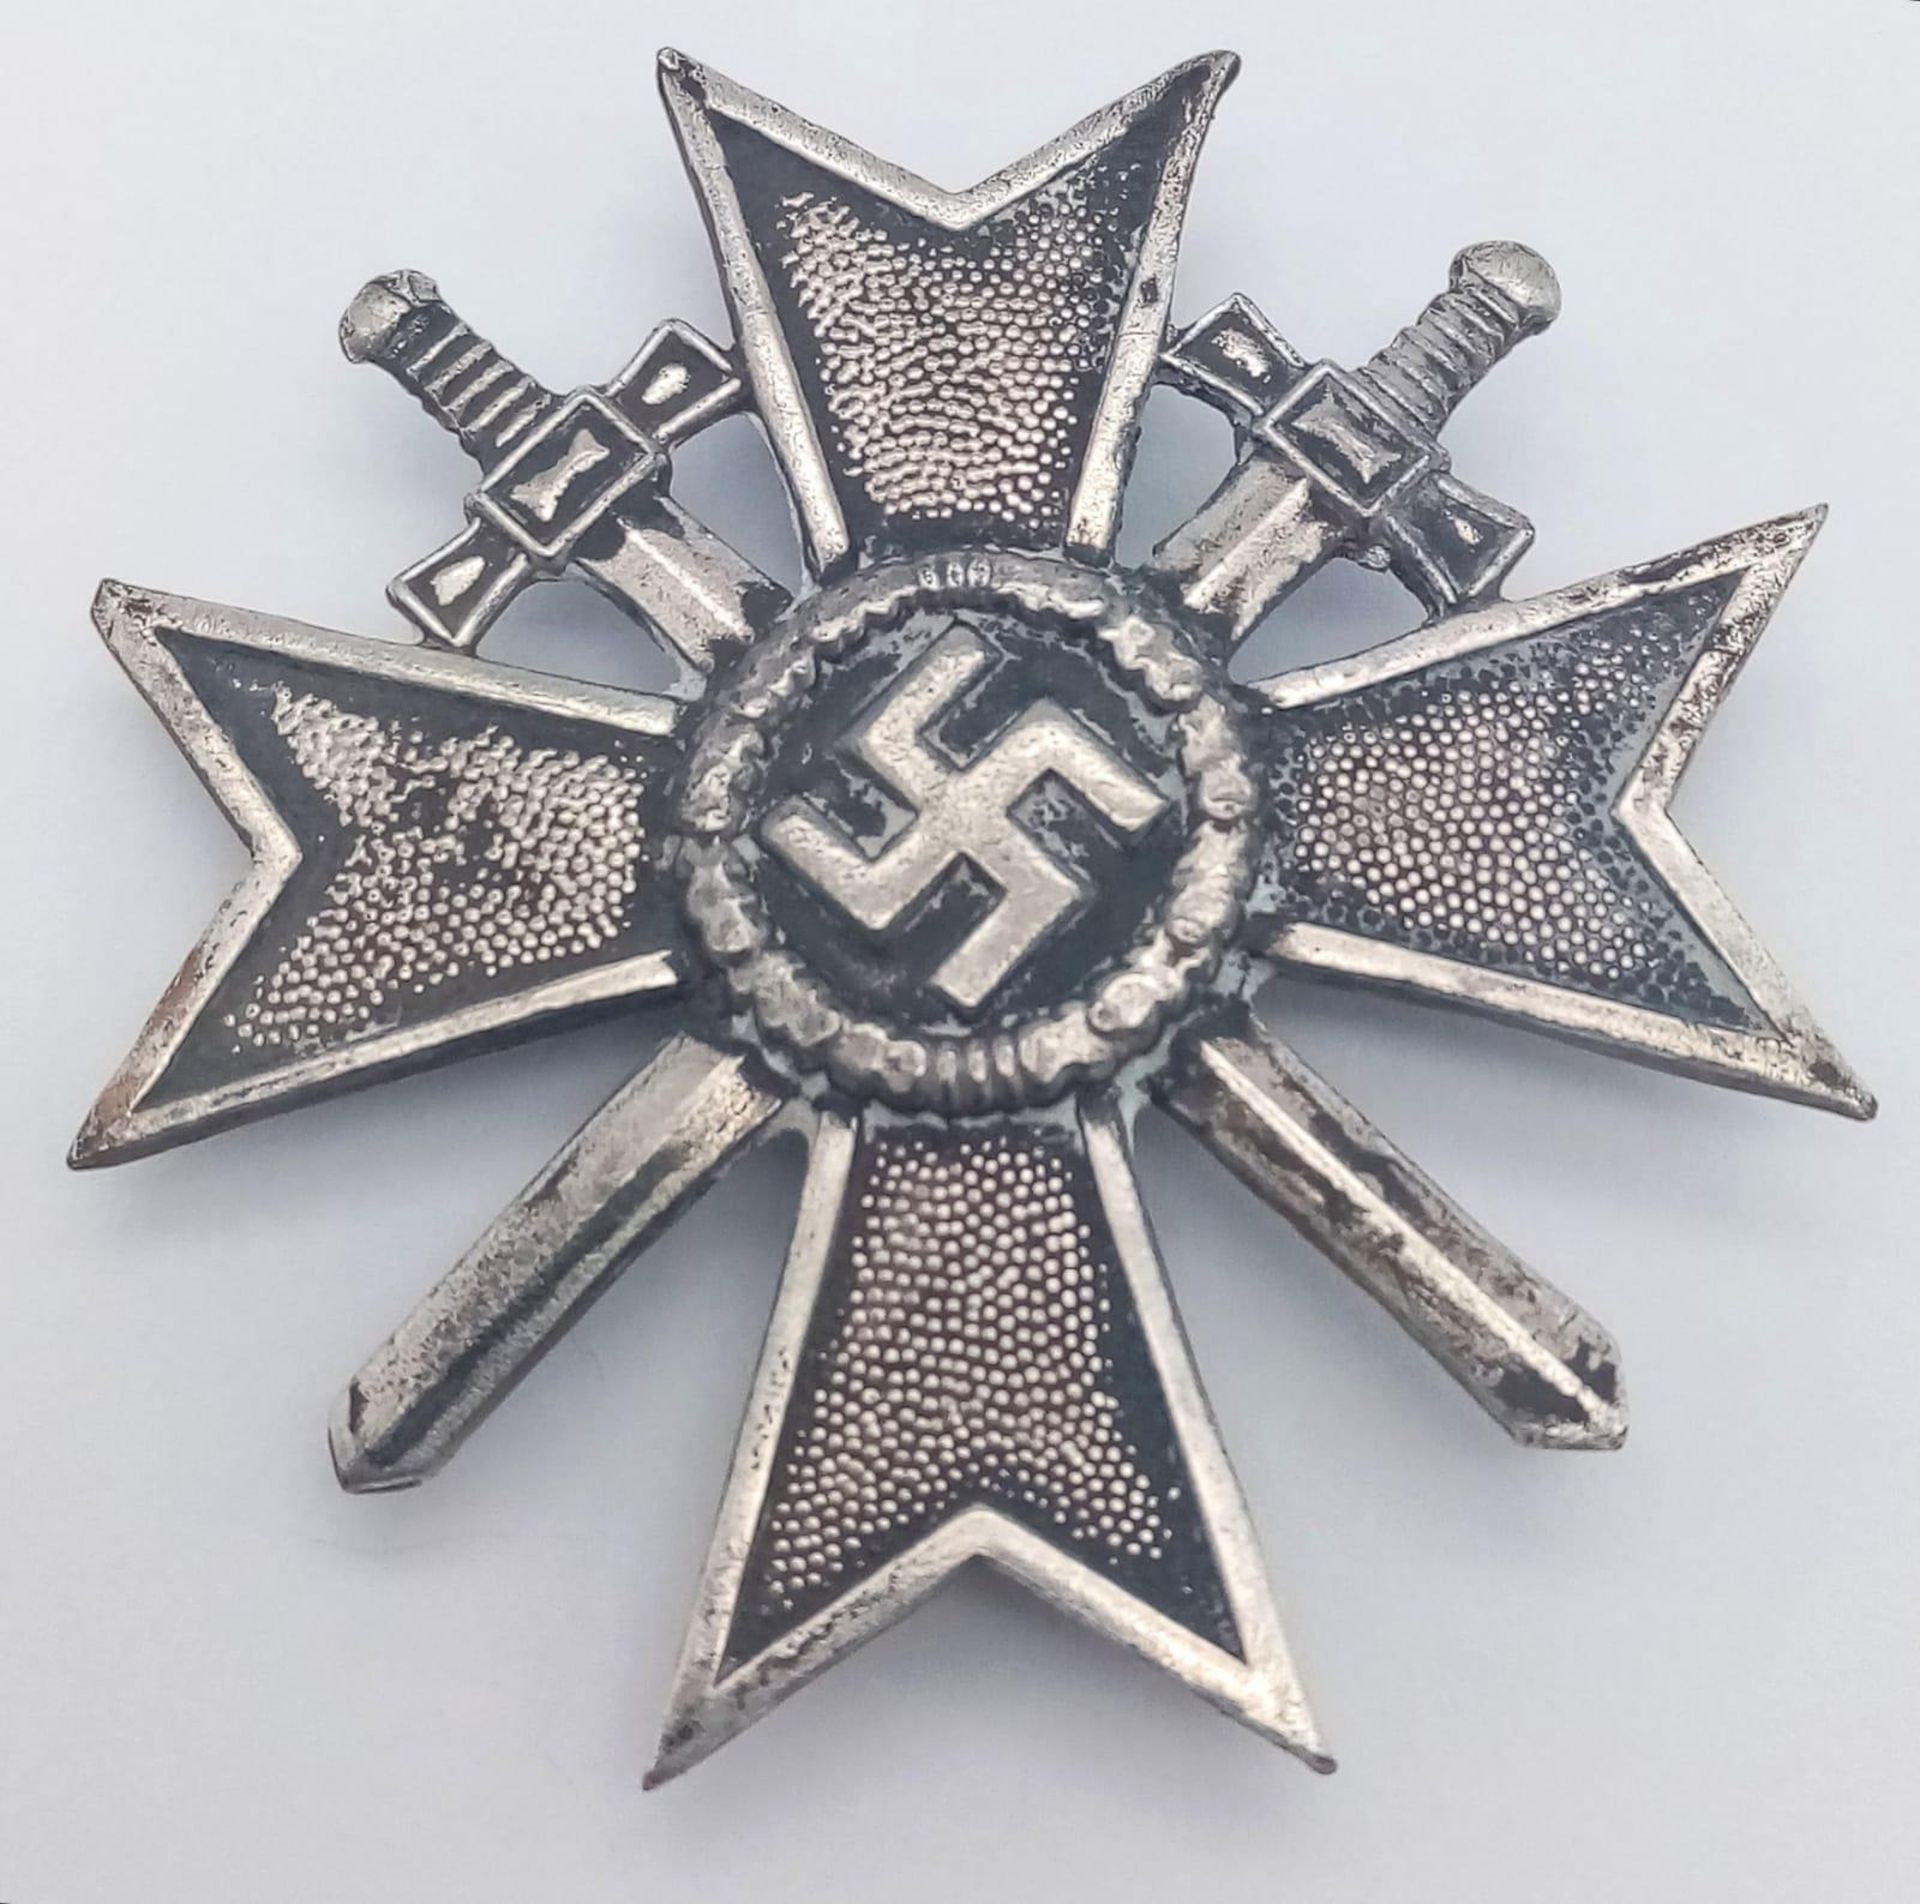 3rd Reich War Merit Cross 1st Class with swords Marked “2” on the pin.